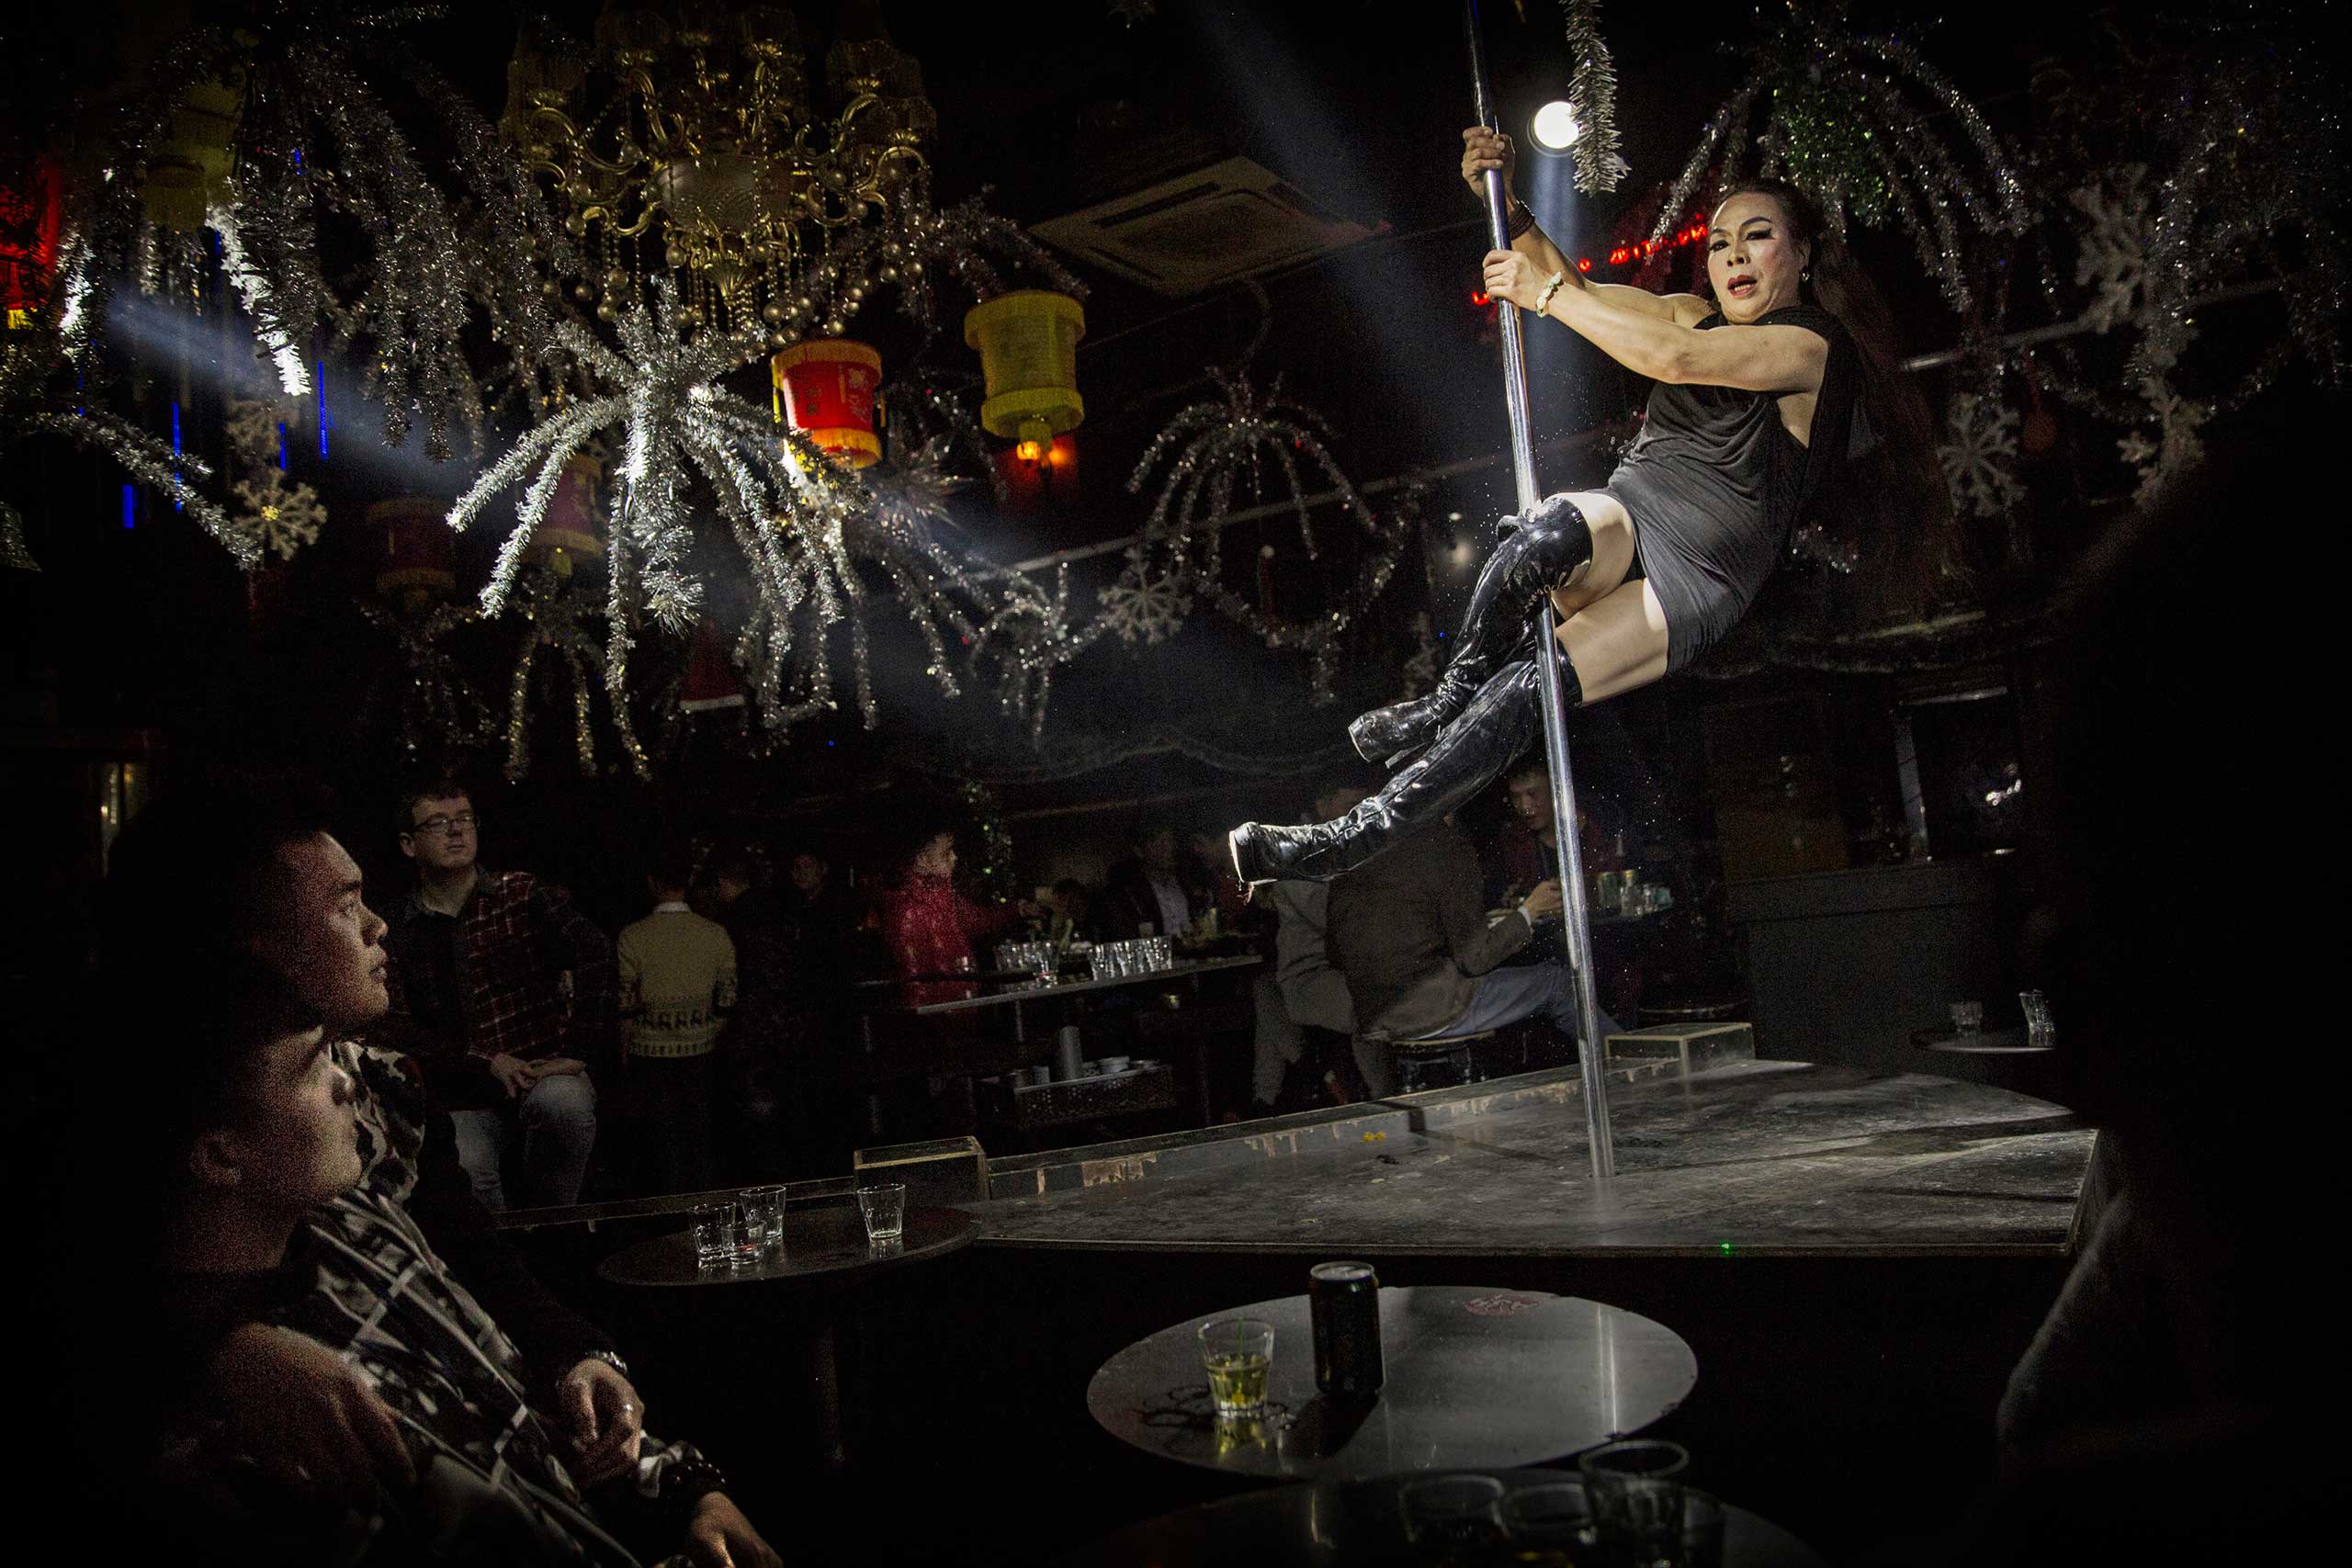 Chinese drag queen who goes by the name Shancun swings on a pole while performing a routine for customers at the Chunai 98 club in Nanning, Guangxi Province, southern China, Jan. 10, 2015.